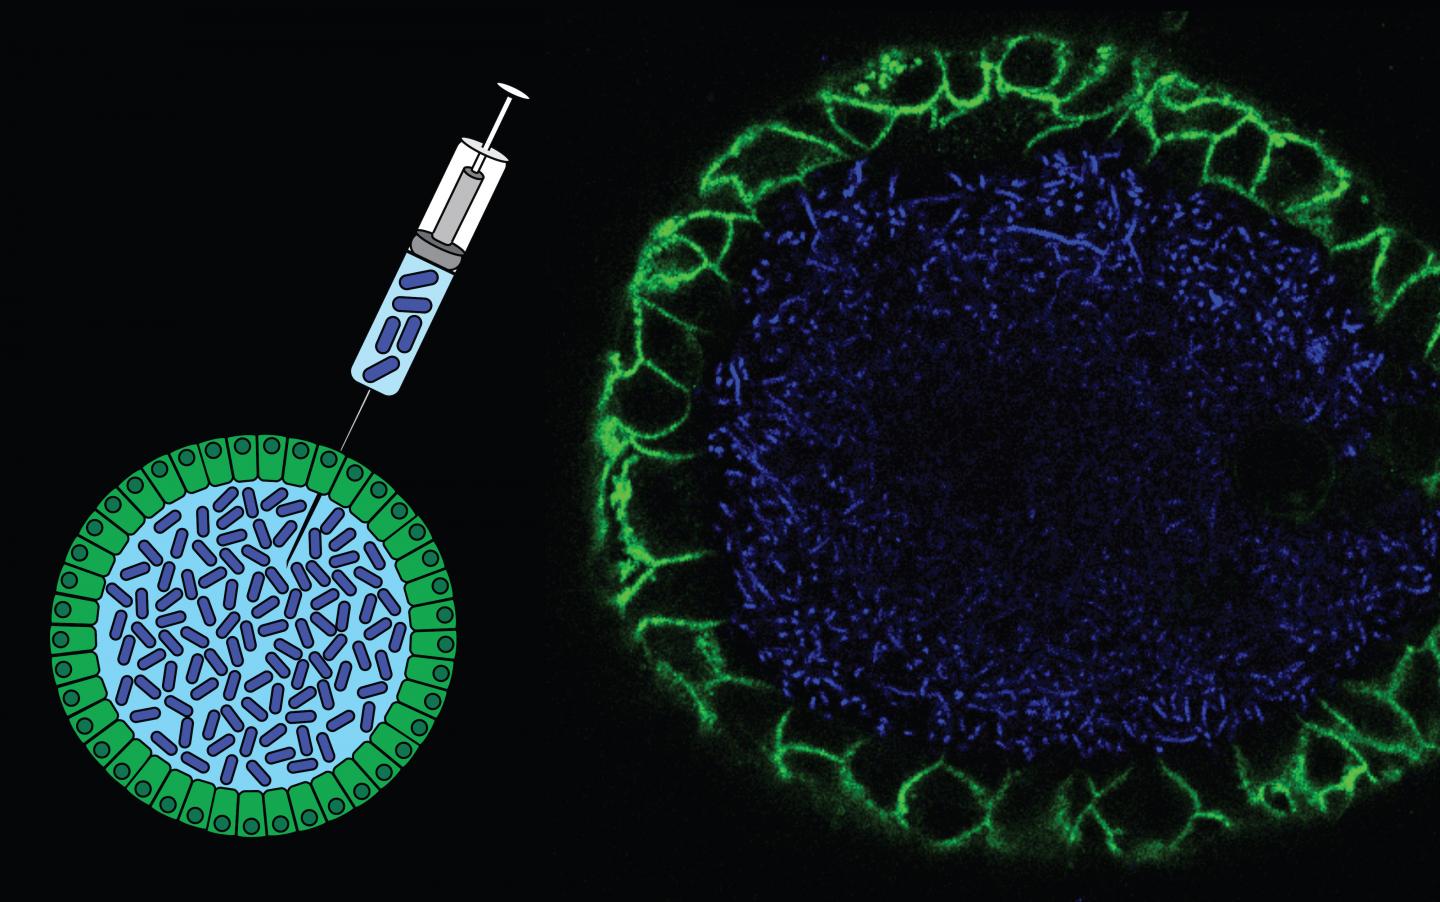 Injection of Bacteria in An Organoid